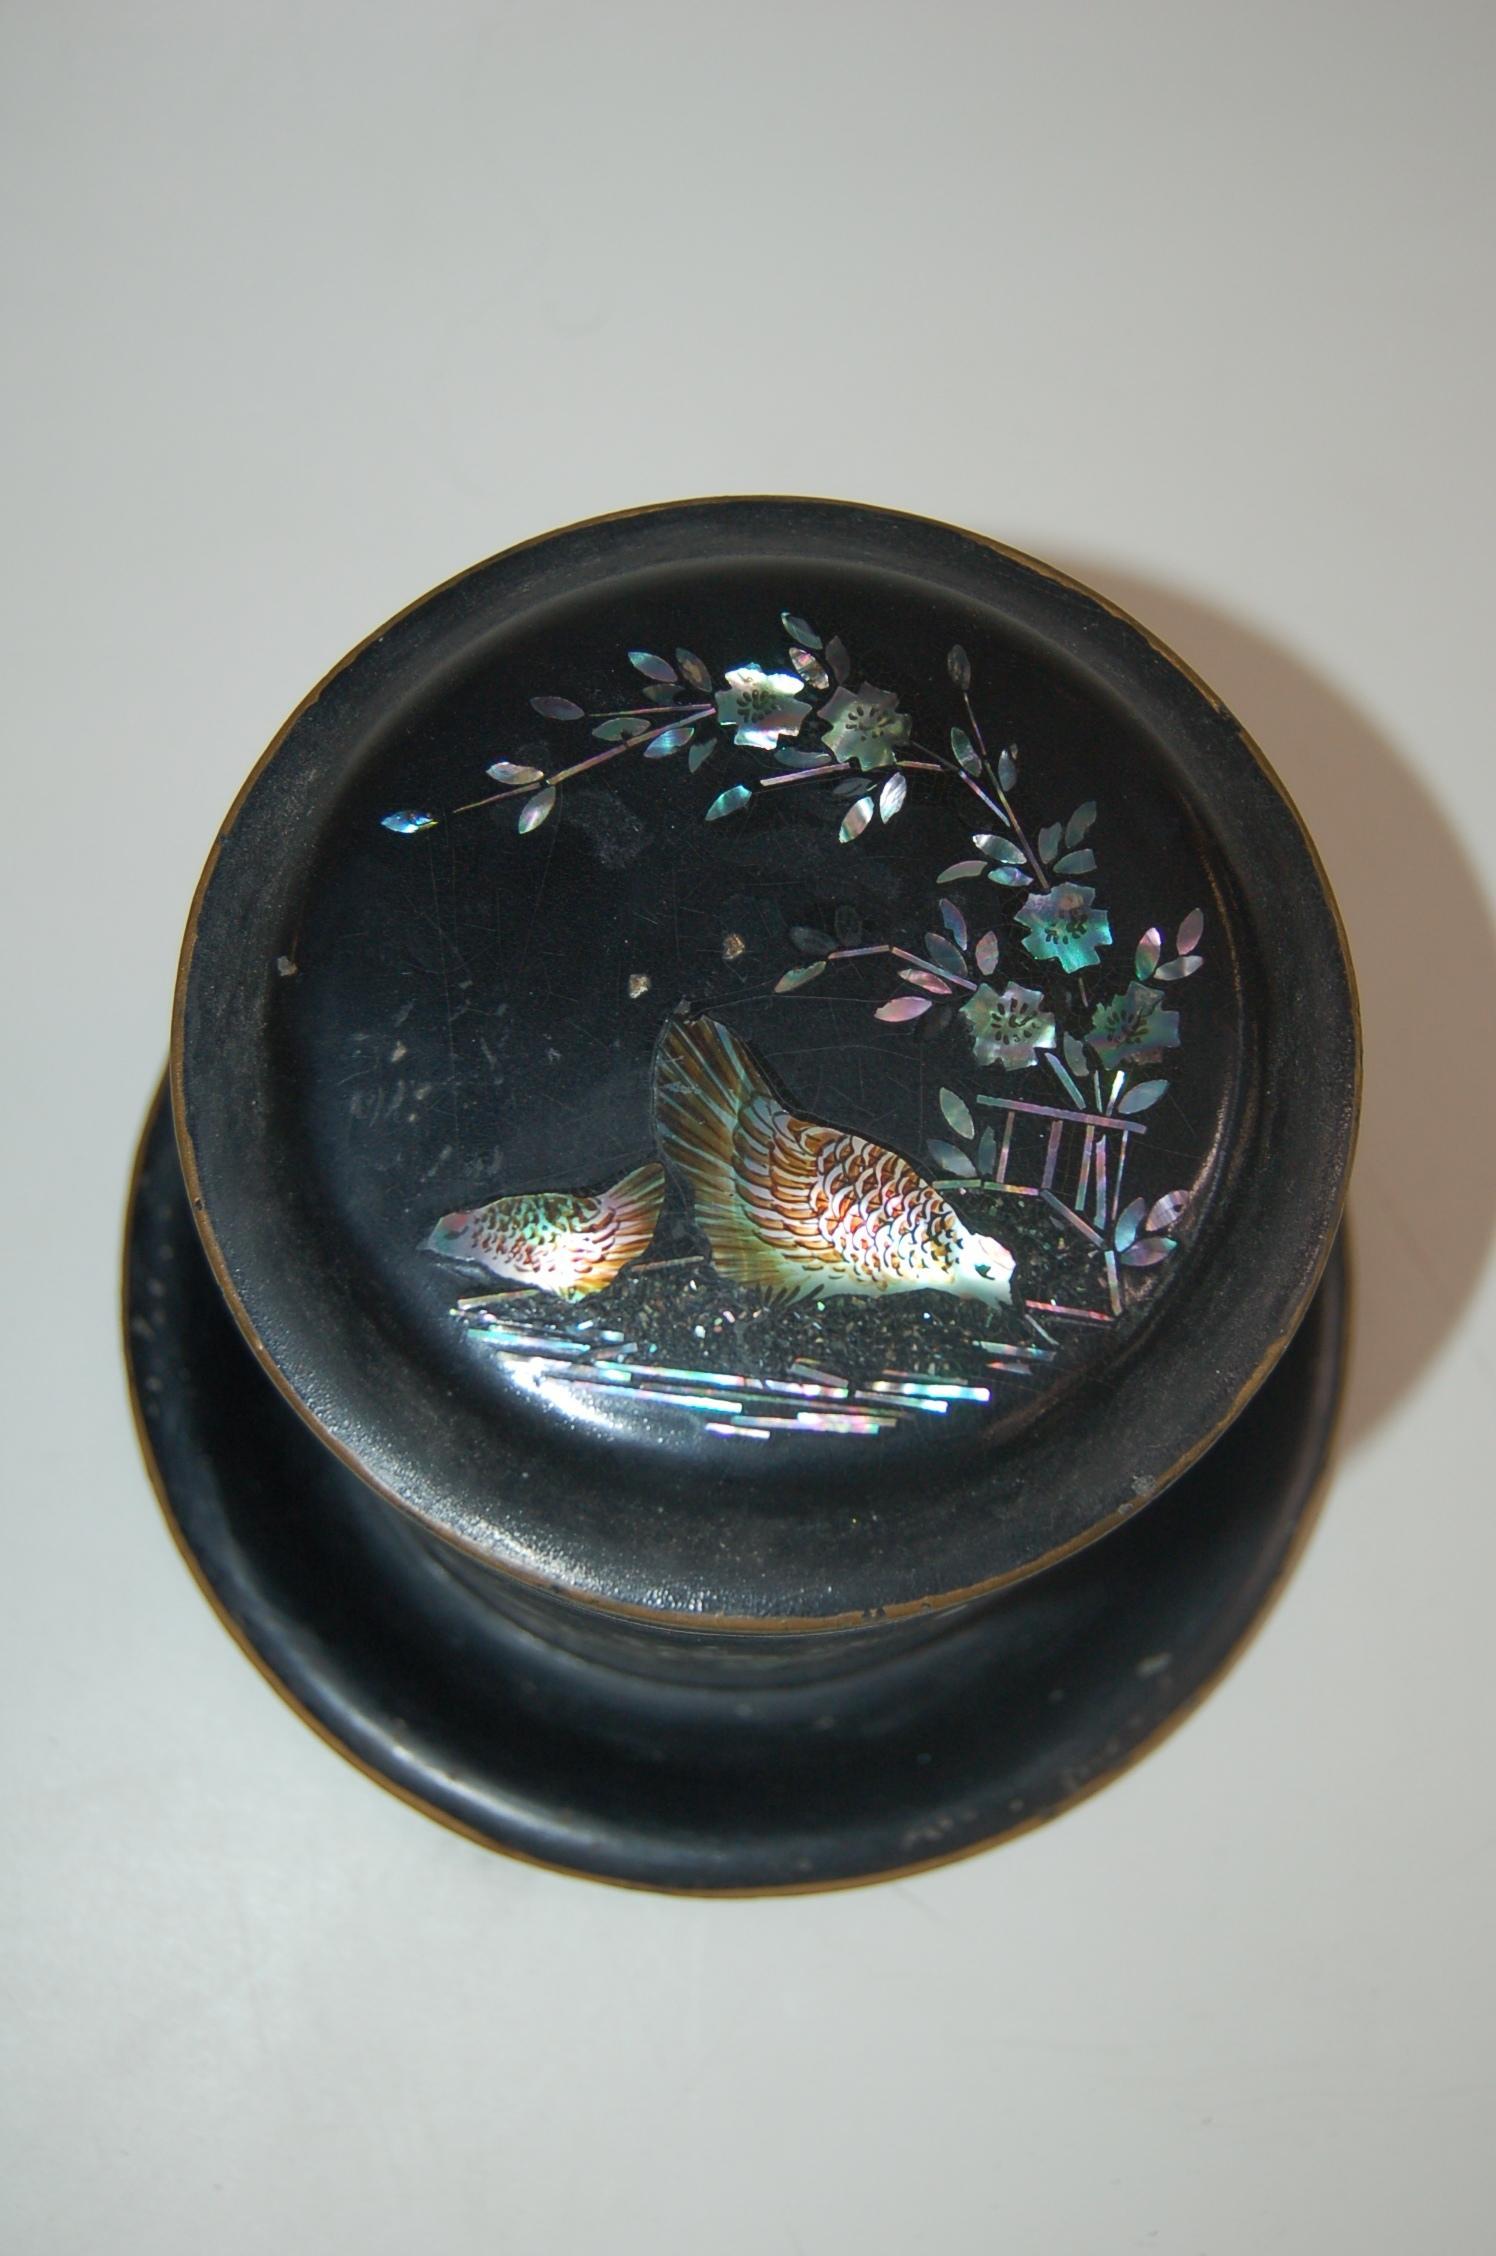 Vintage Japanese black tin with Aboloni accents round tea caddie/canister hinged top and removable inner piece in chicken and floral motif. 

Measures 6